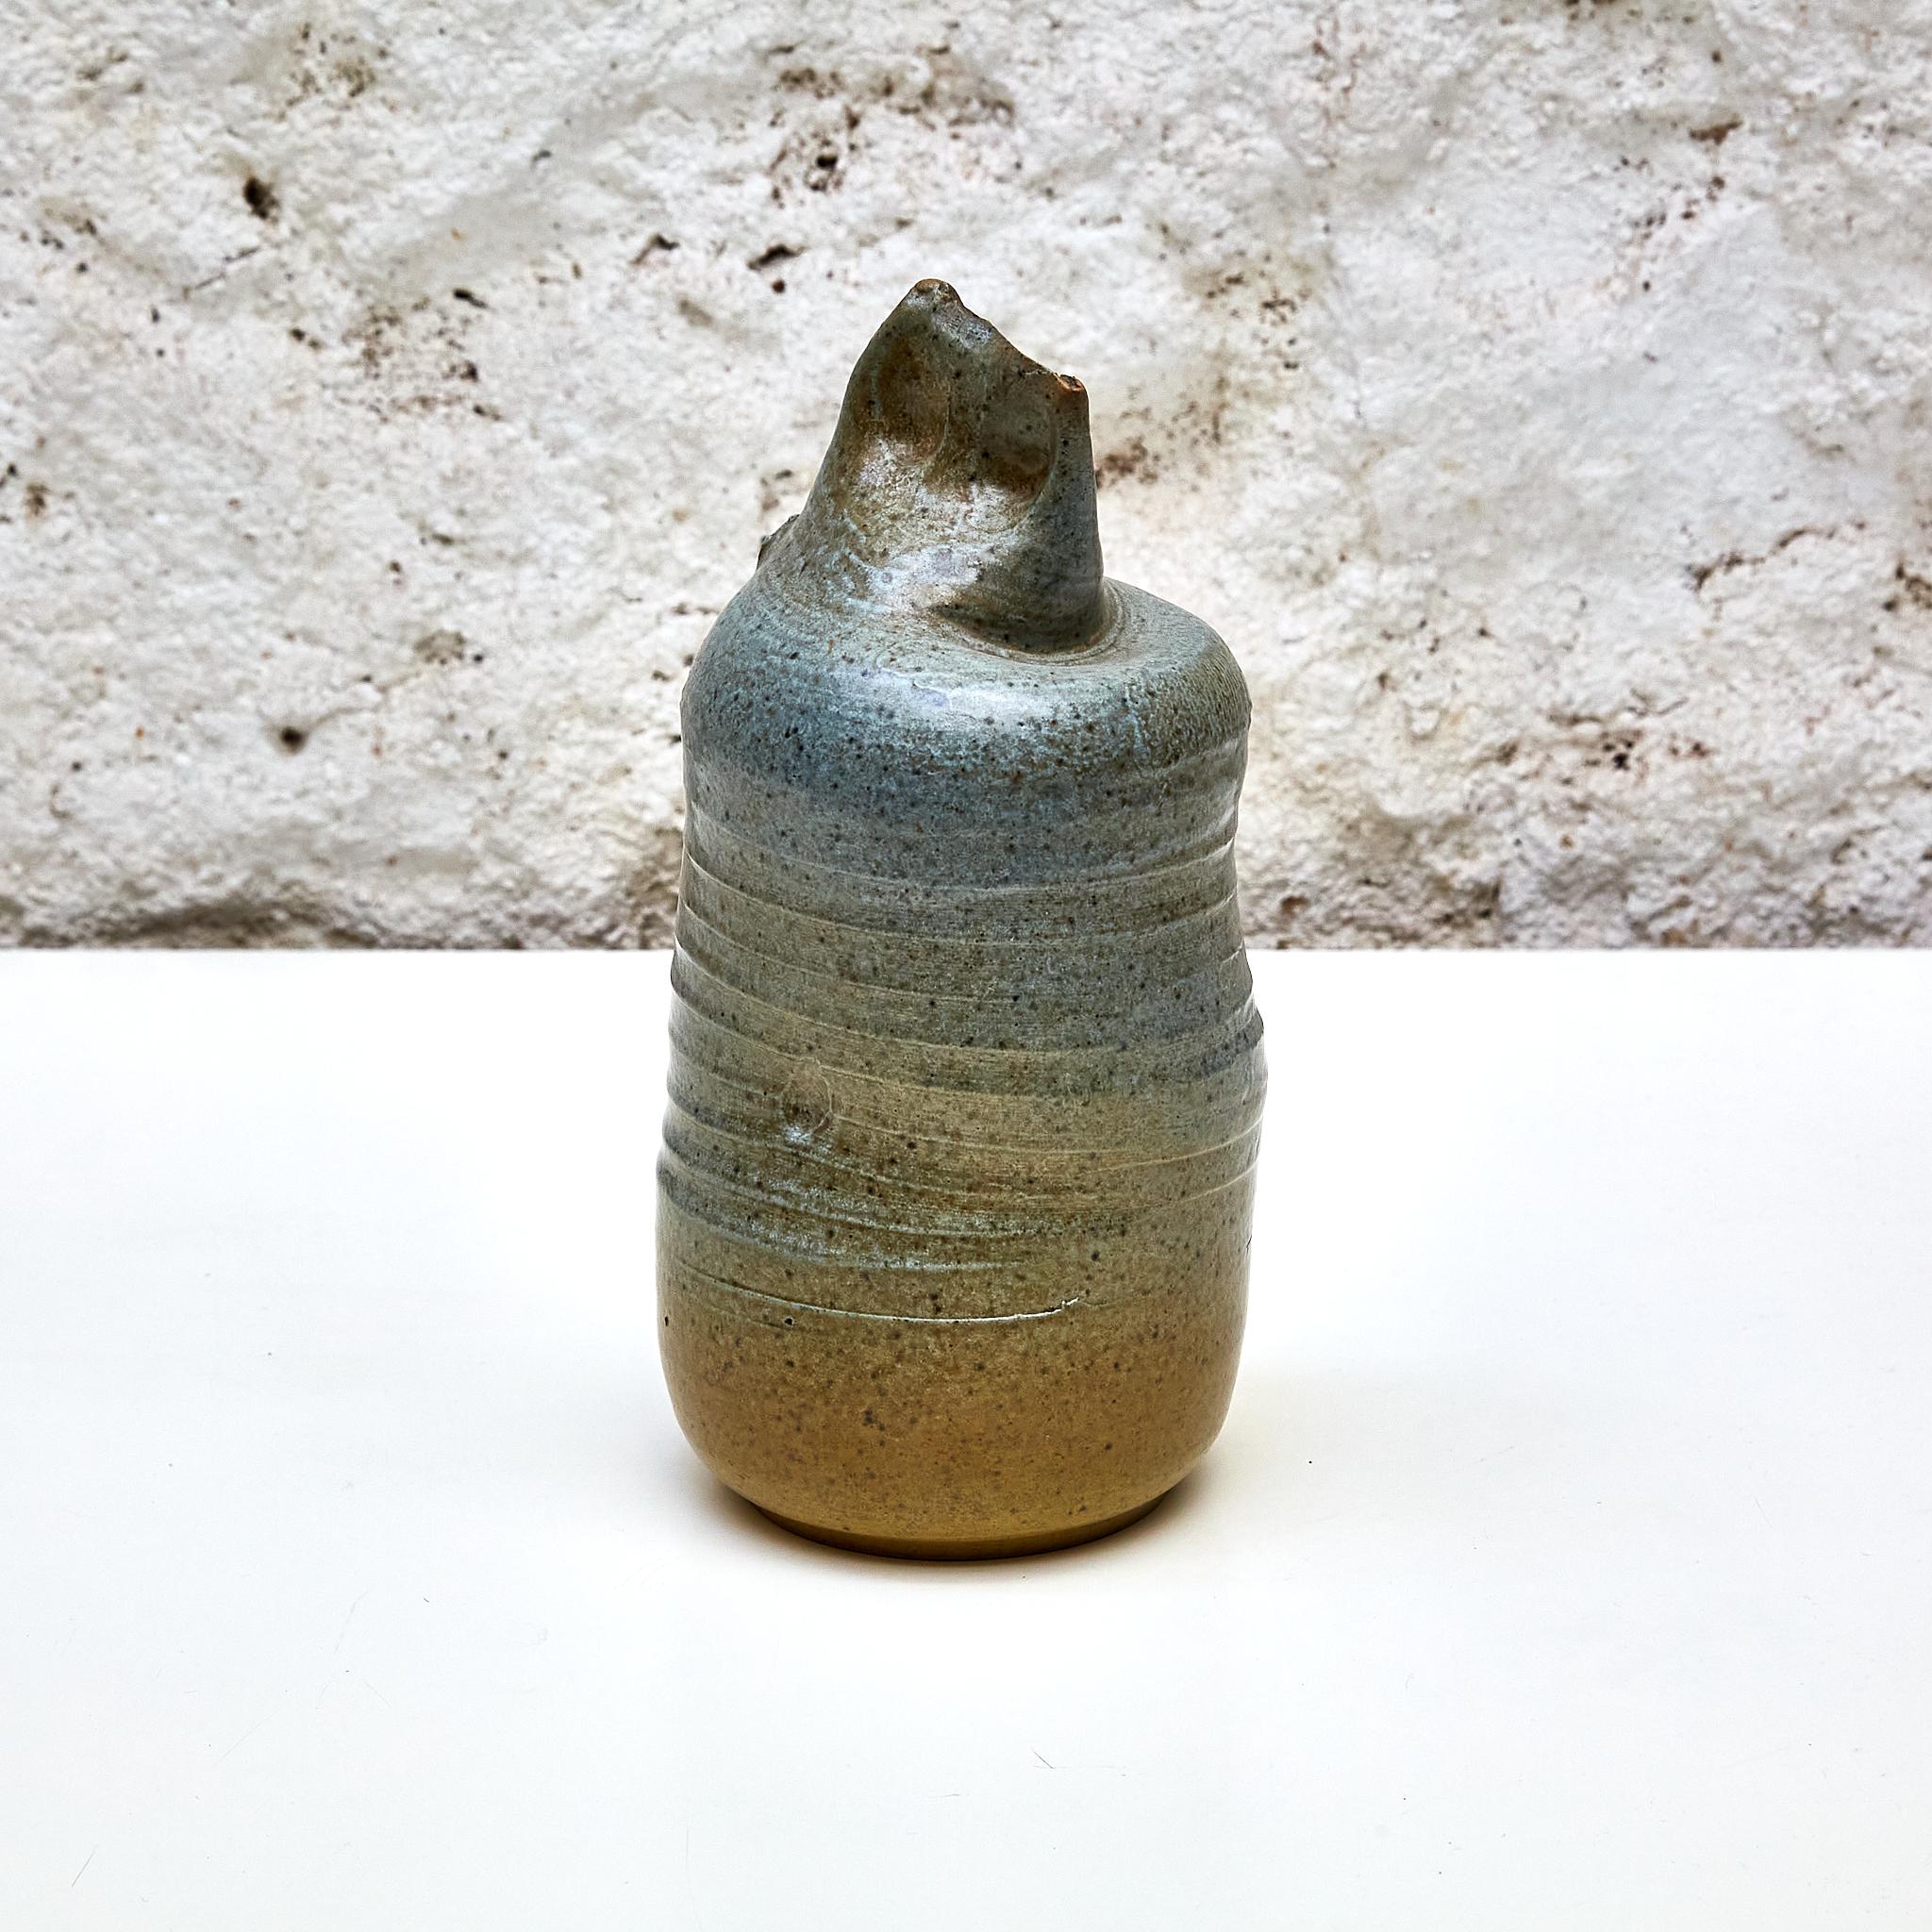 Ceramic Sculpture Vase by Francisco Fernandez Navarro a student of Massana School.

Manufactured in Spain, circa 1970.

In original condition with minor wear consistent of age and use, preserving a beautiful patina.

Materials: